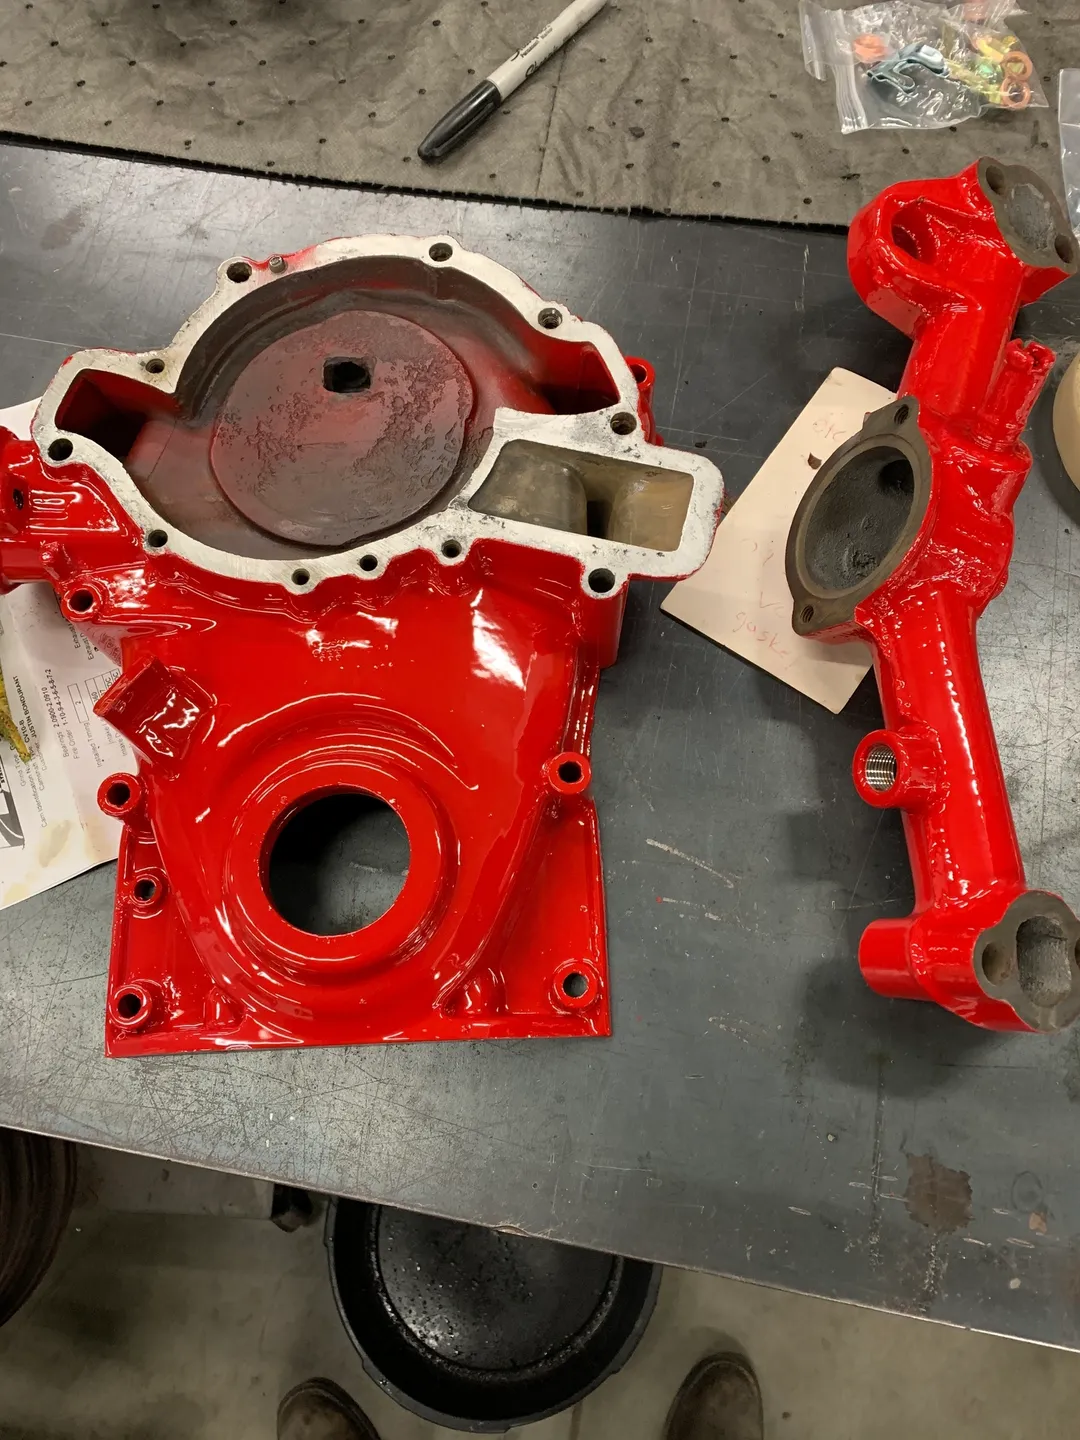 The red, open Custom fabricated auto parts